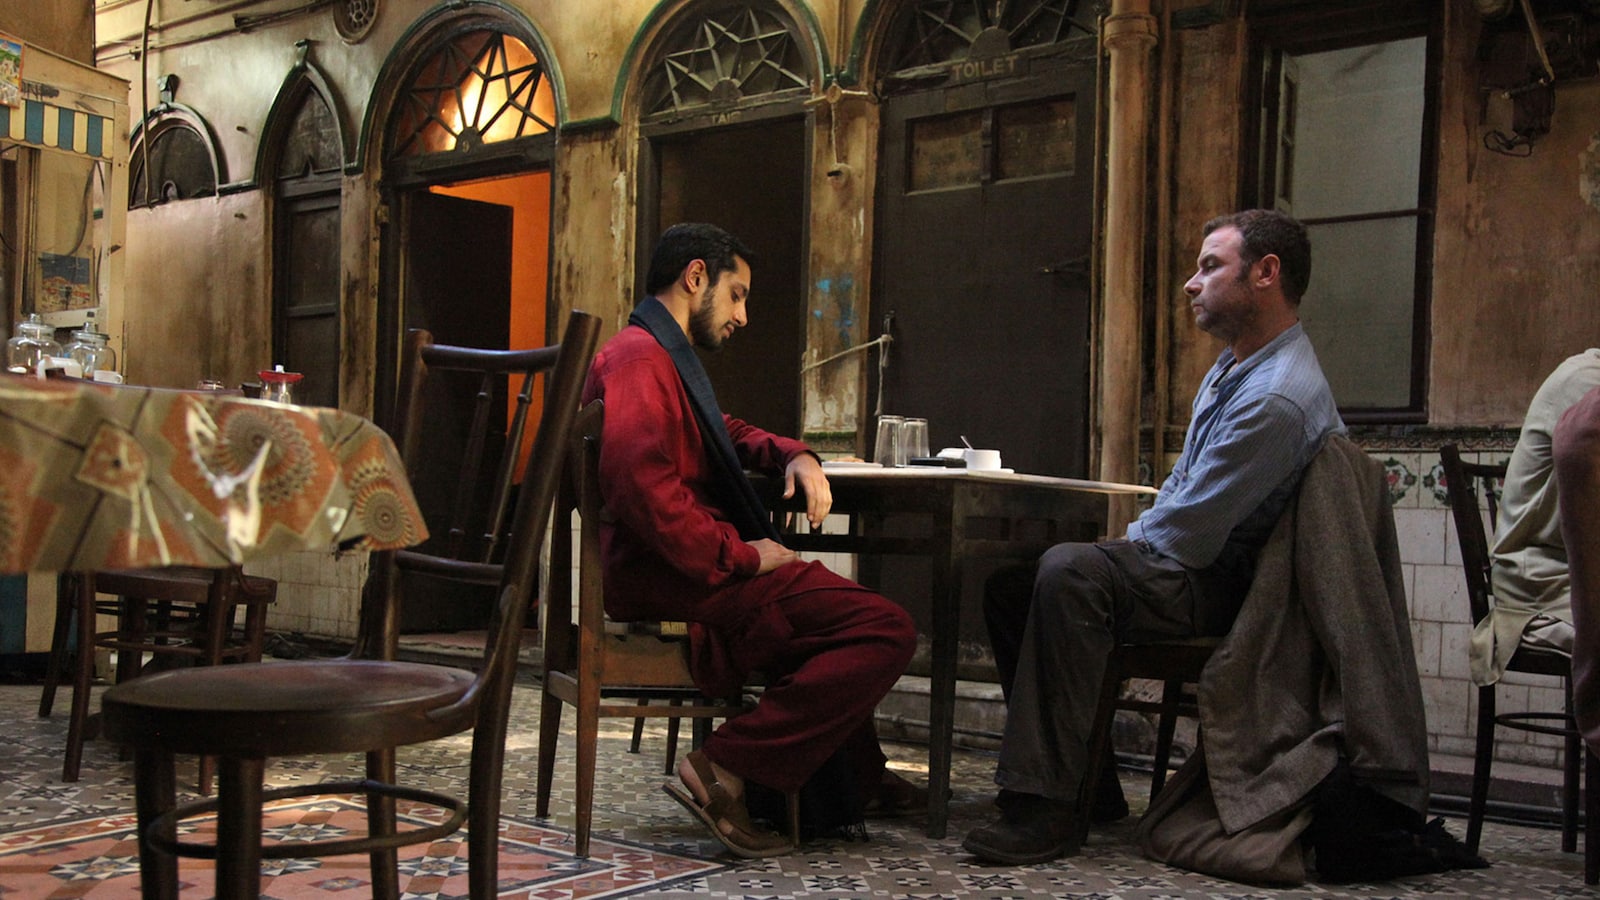 the-reluctant-fundamentalist-2012